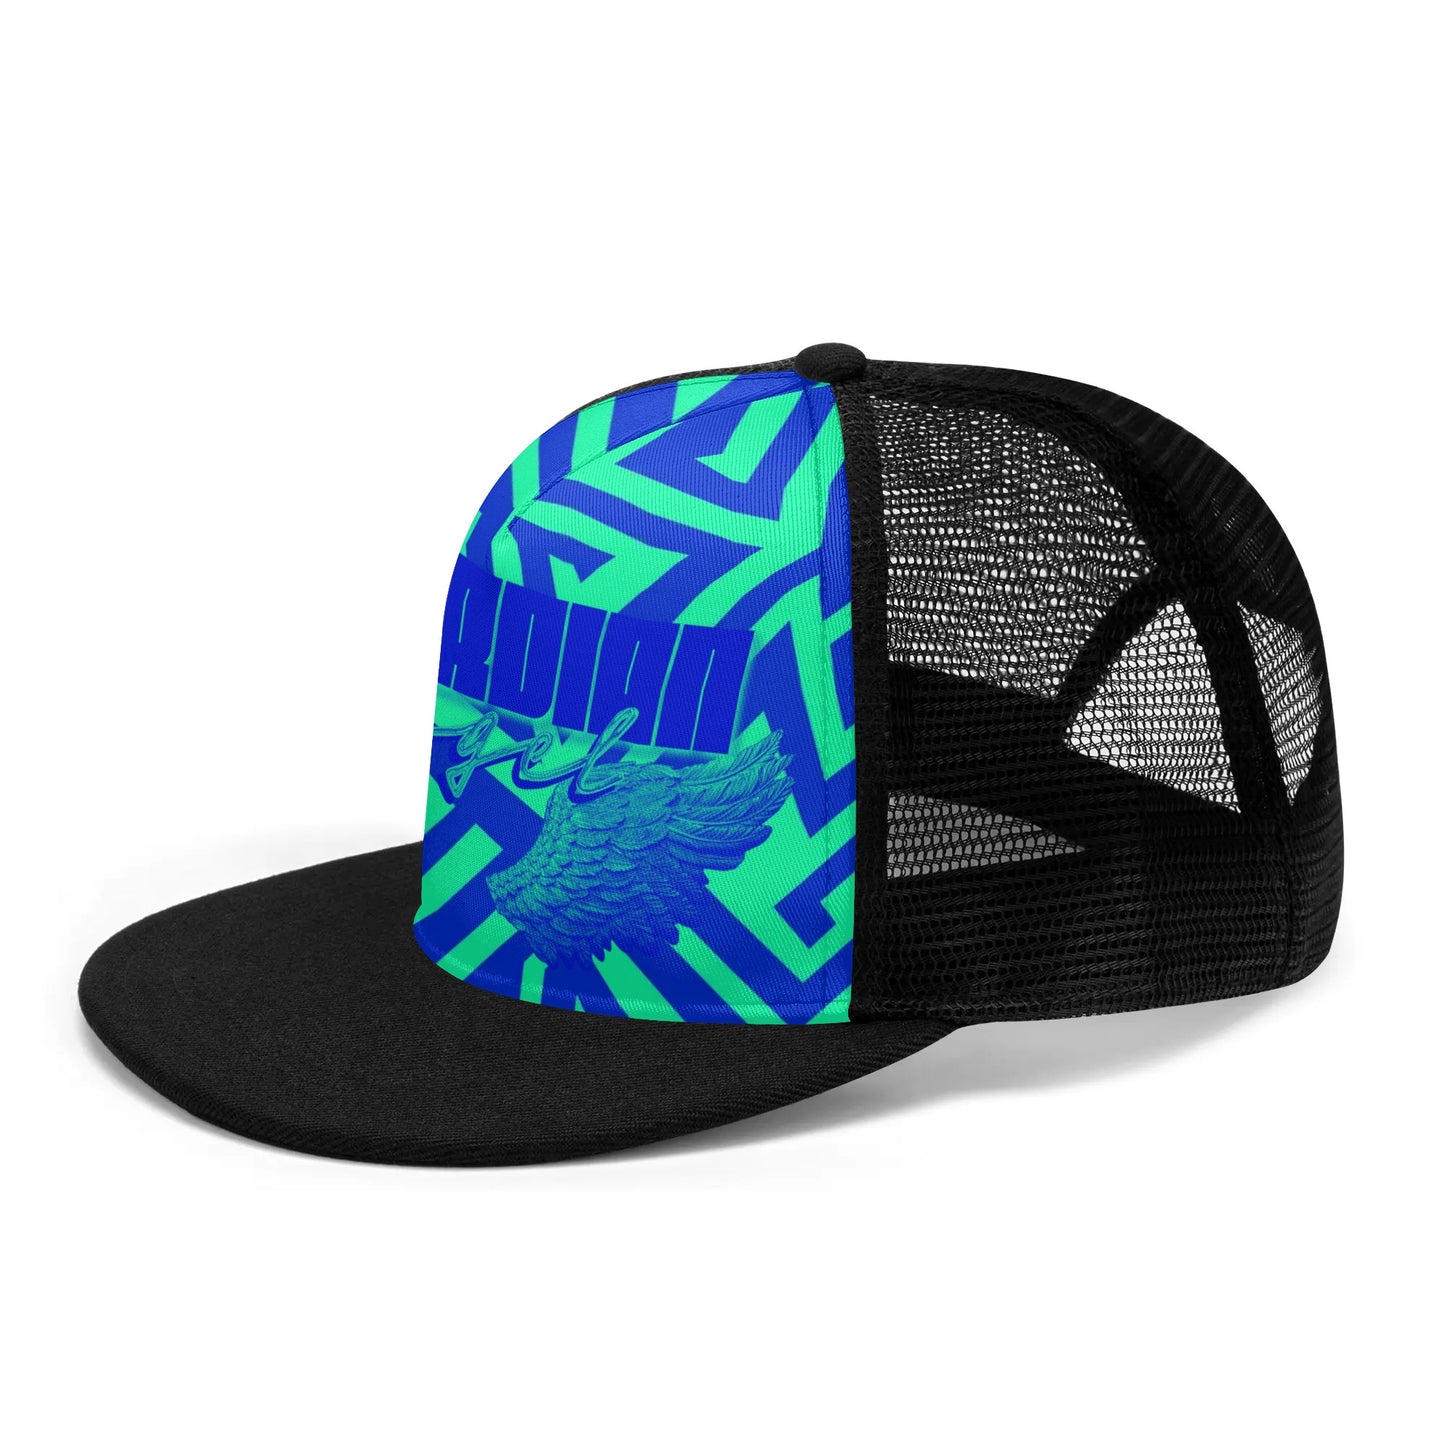 GUARDIAN ANGEL- Front Printing Adjustable Snapback Trucker Hat, Free Shipping